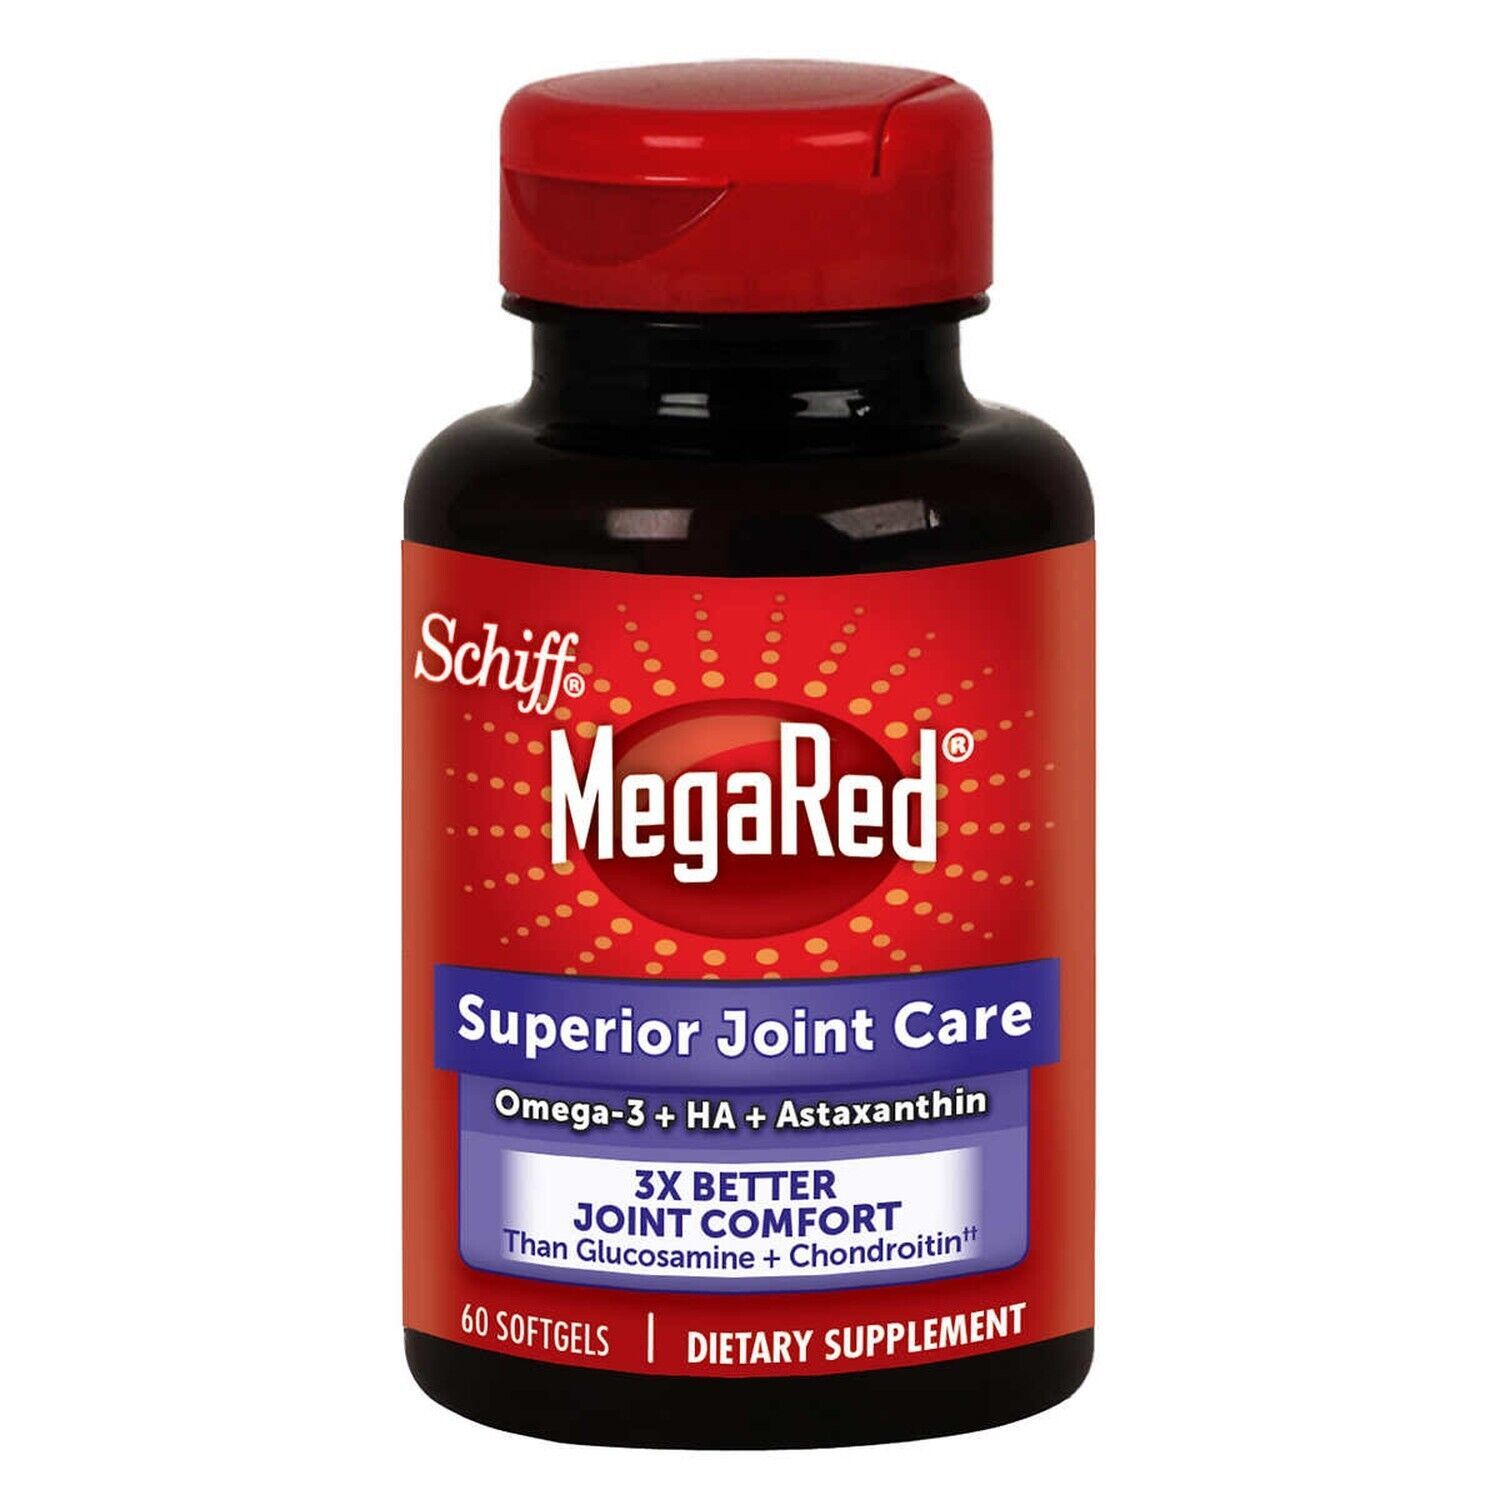 MEGARED KRILL OIL MEGA RED SCHIFF OMEGA 3 SUPERIOR JOINT CARE 350 MG ~ 60 COUNT - $32.99